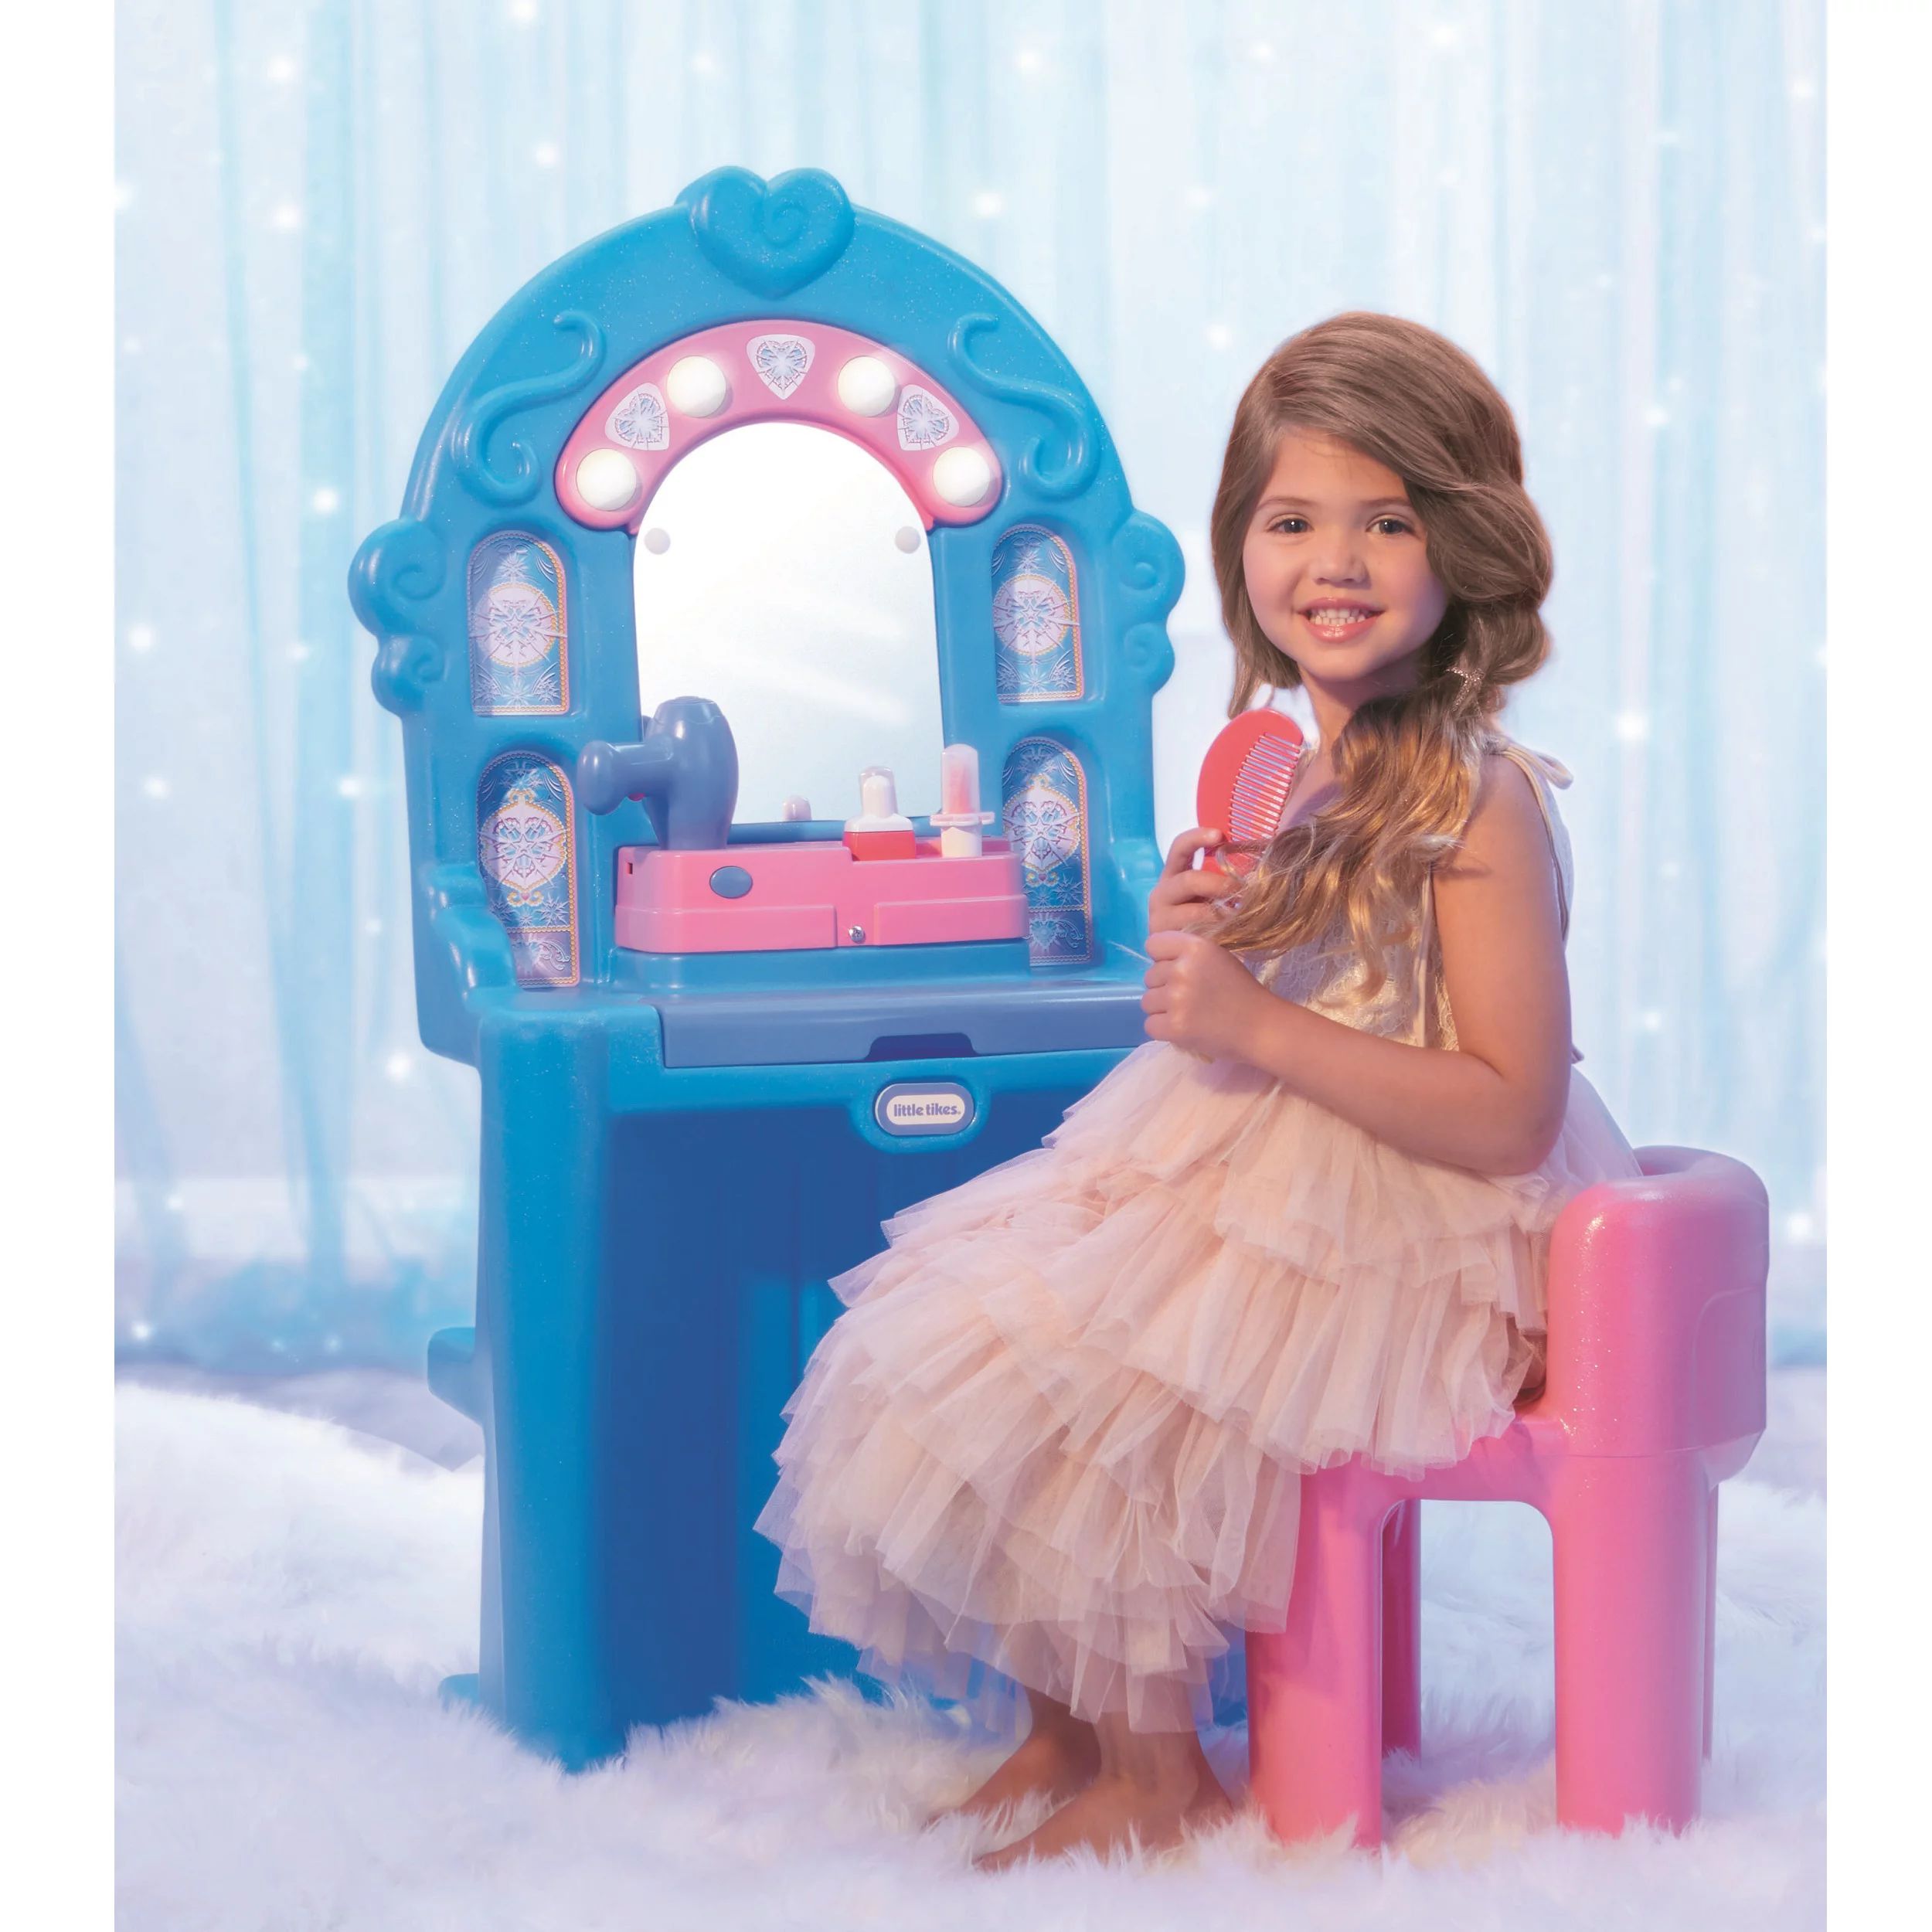 Little Tikes Ice Princess Magic Mirror Toy Vanity Table and Chair with Lights, Sounds and Pretend... | Walmart (US)